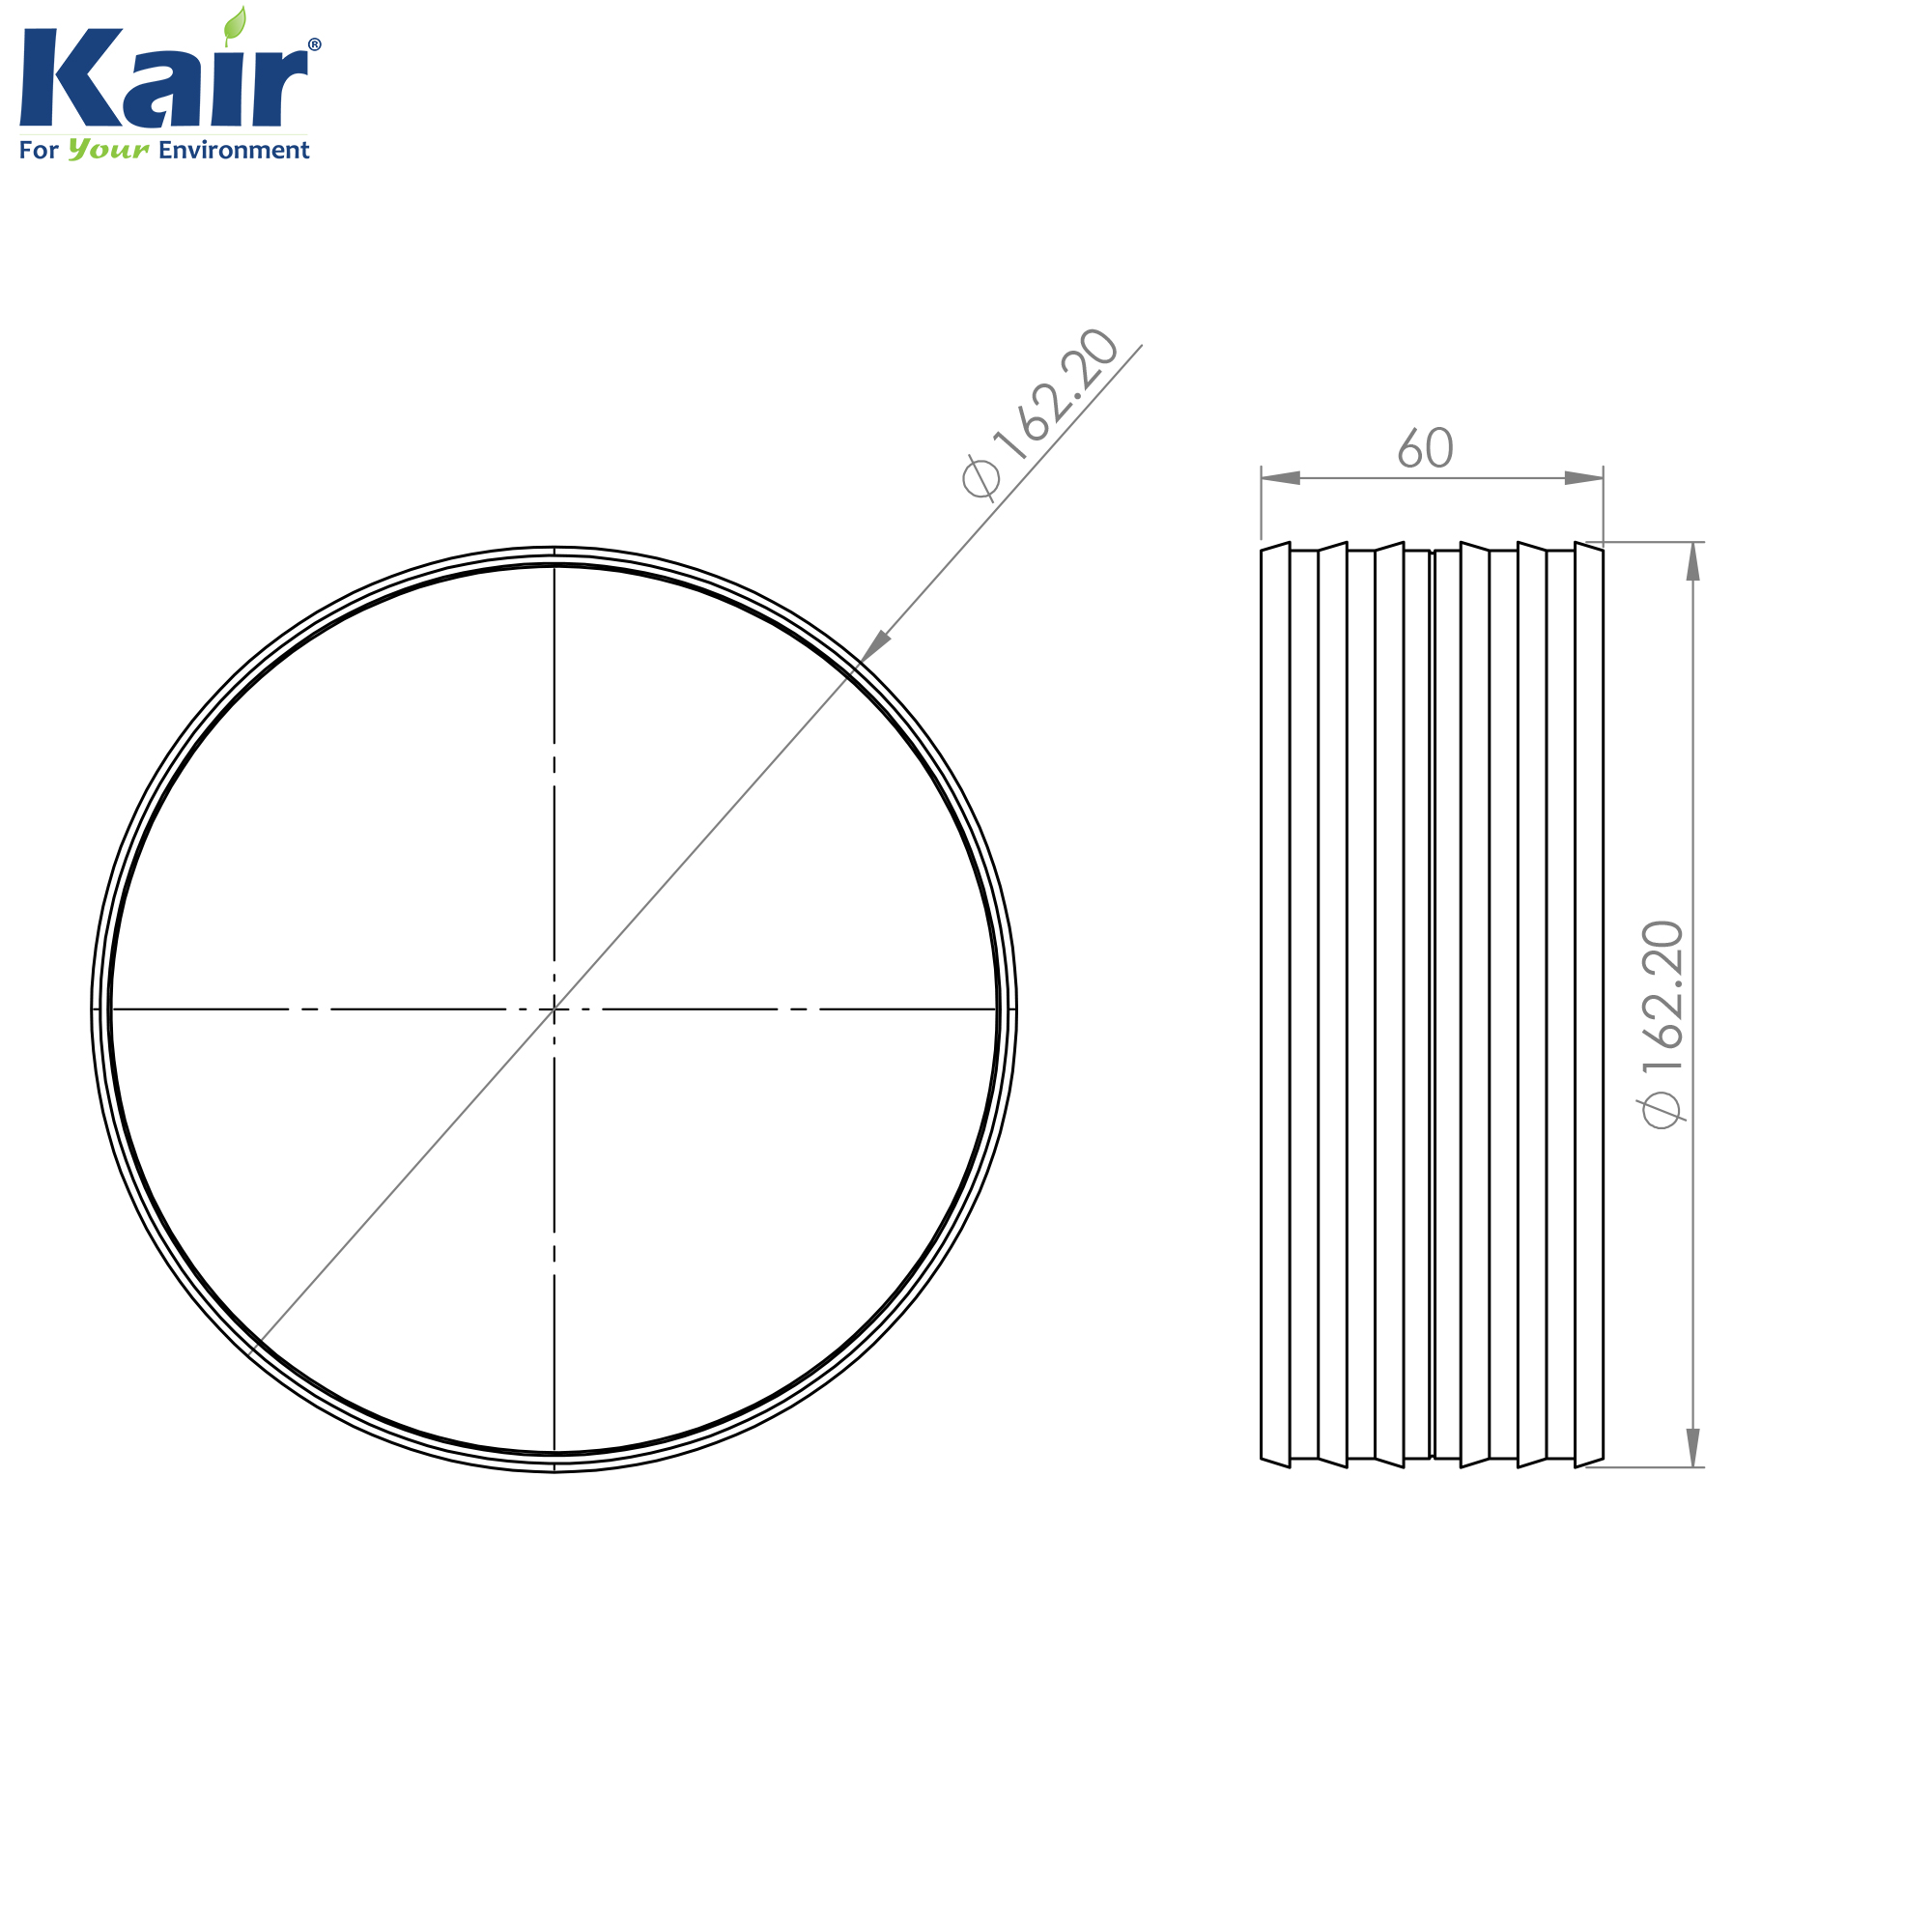 Male Duct To Duct Connector 160mm Dia Self-Seal Thermal by Kair